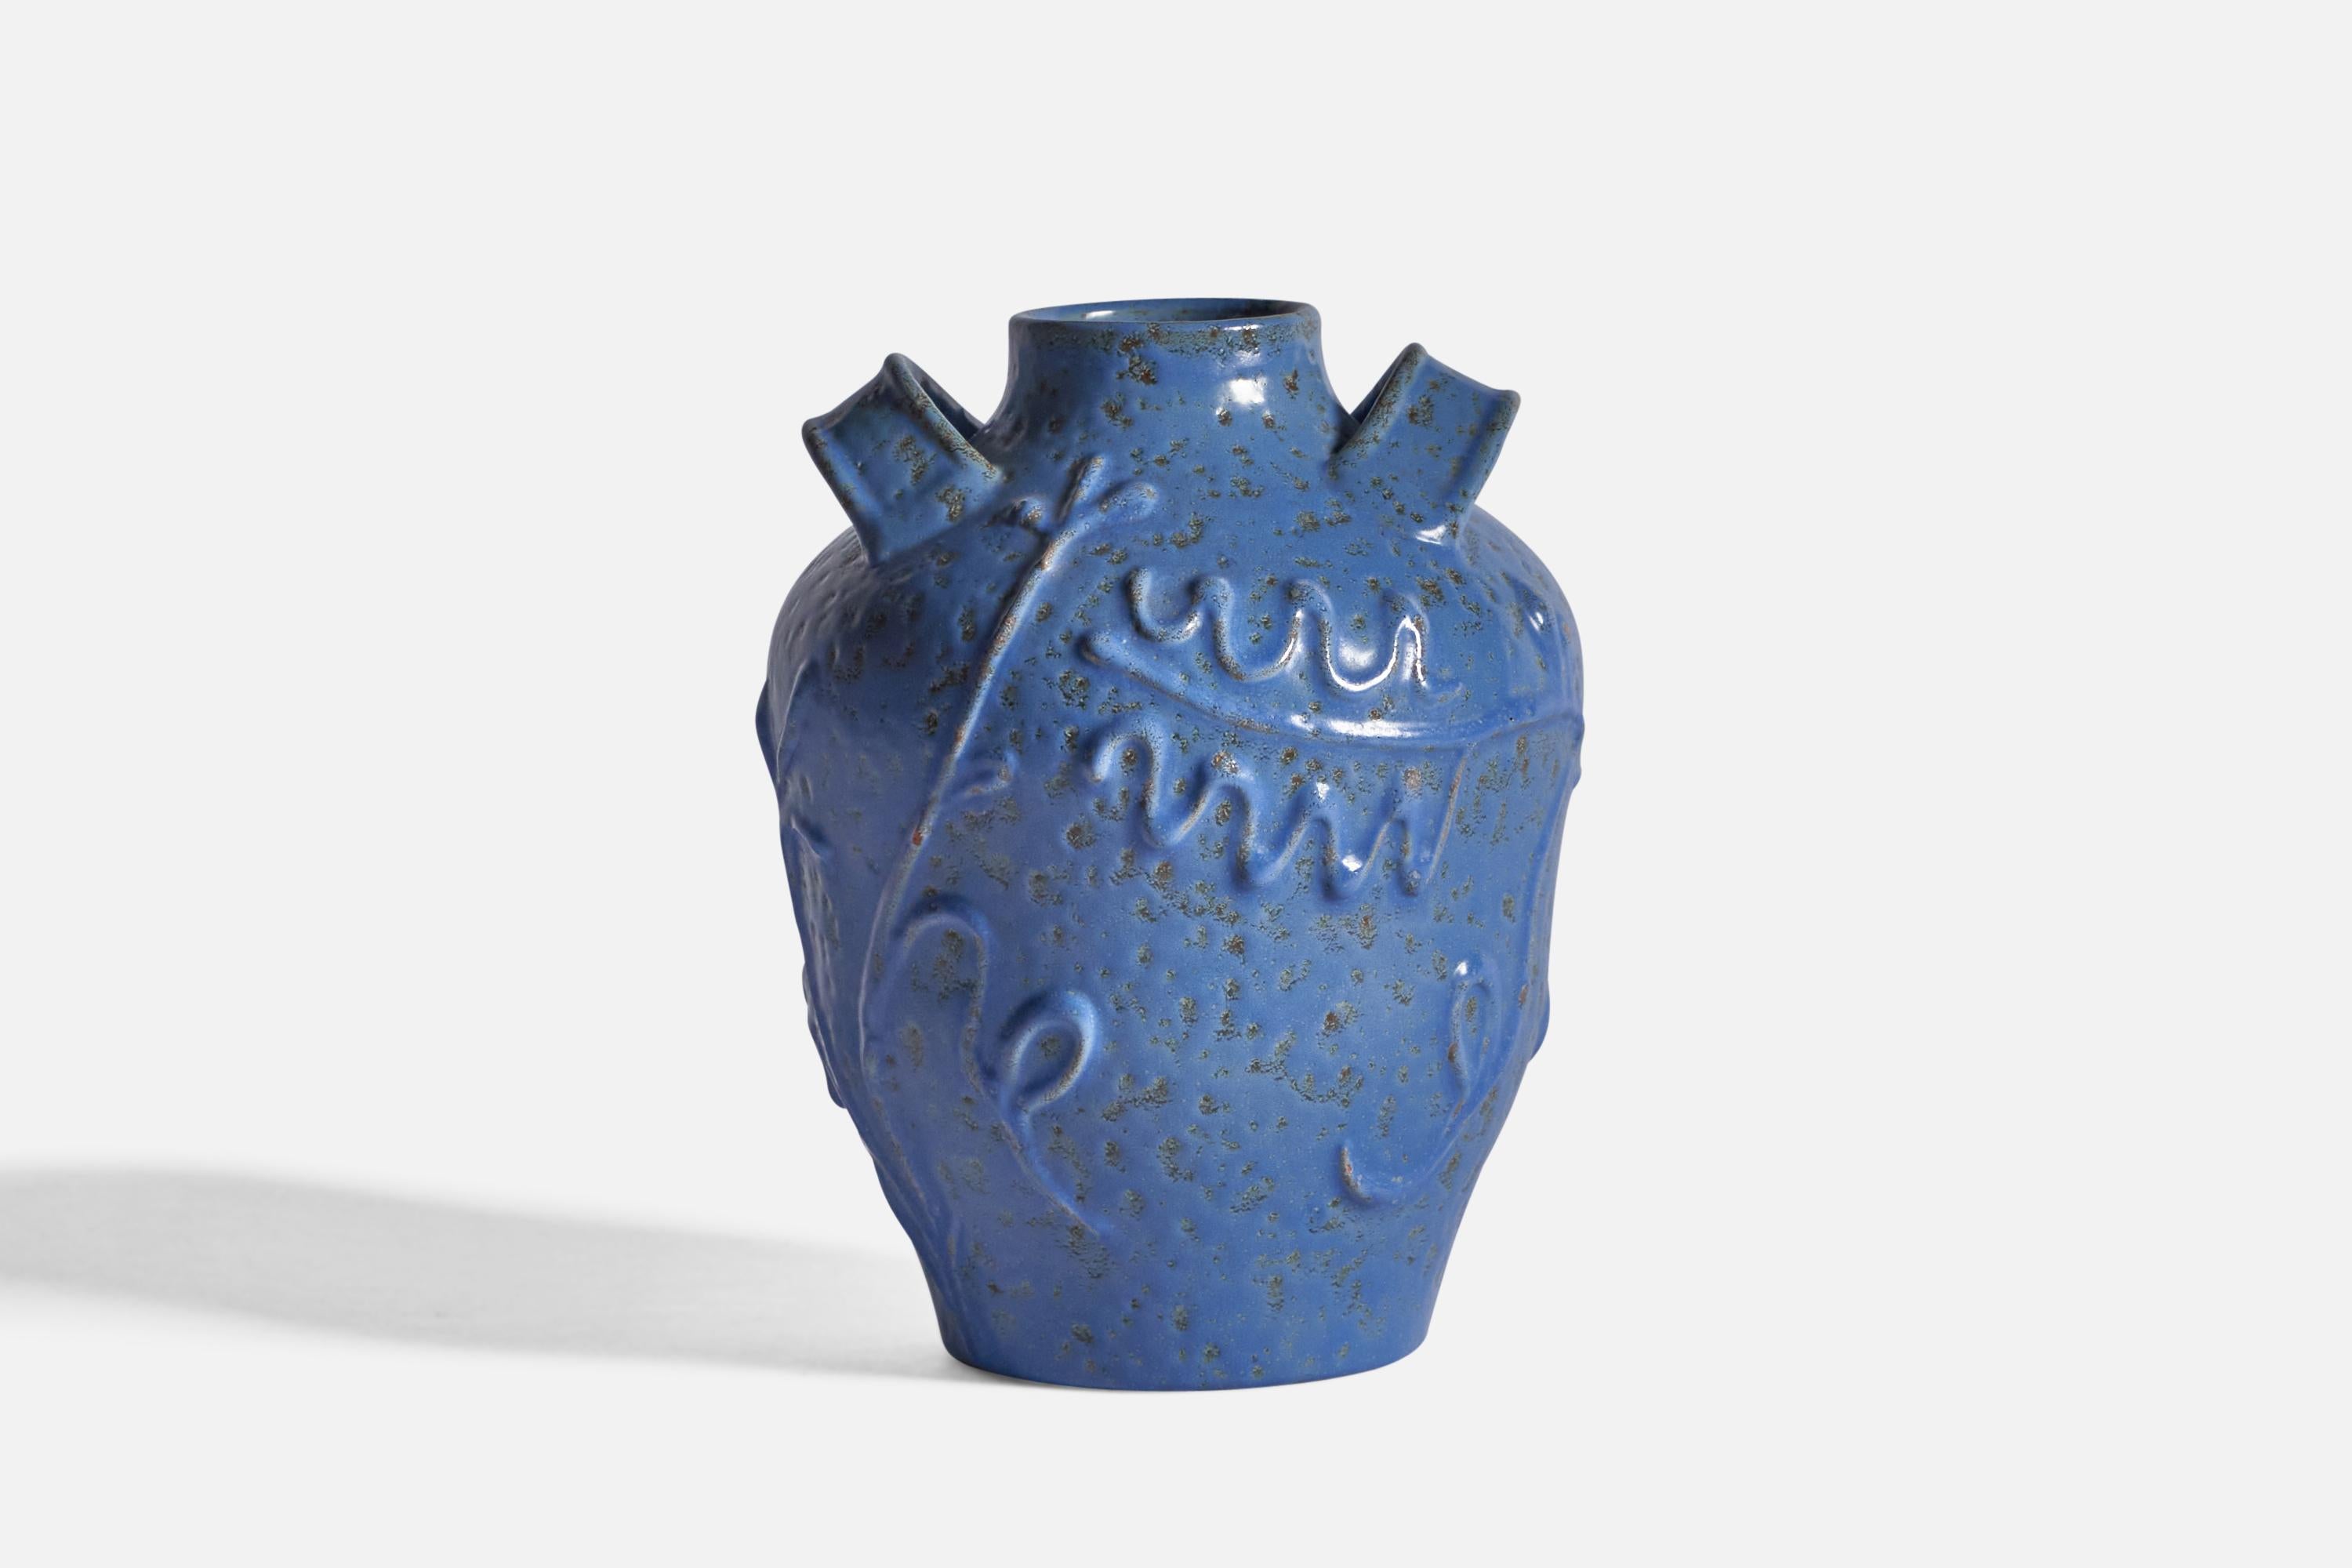 A blue-glazed earthenware vase with relief ornamentation, designed and produced by Nittsjö, Sweden, 1940s.